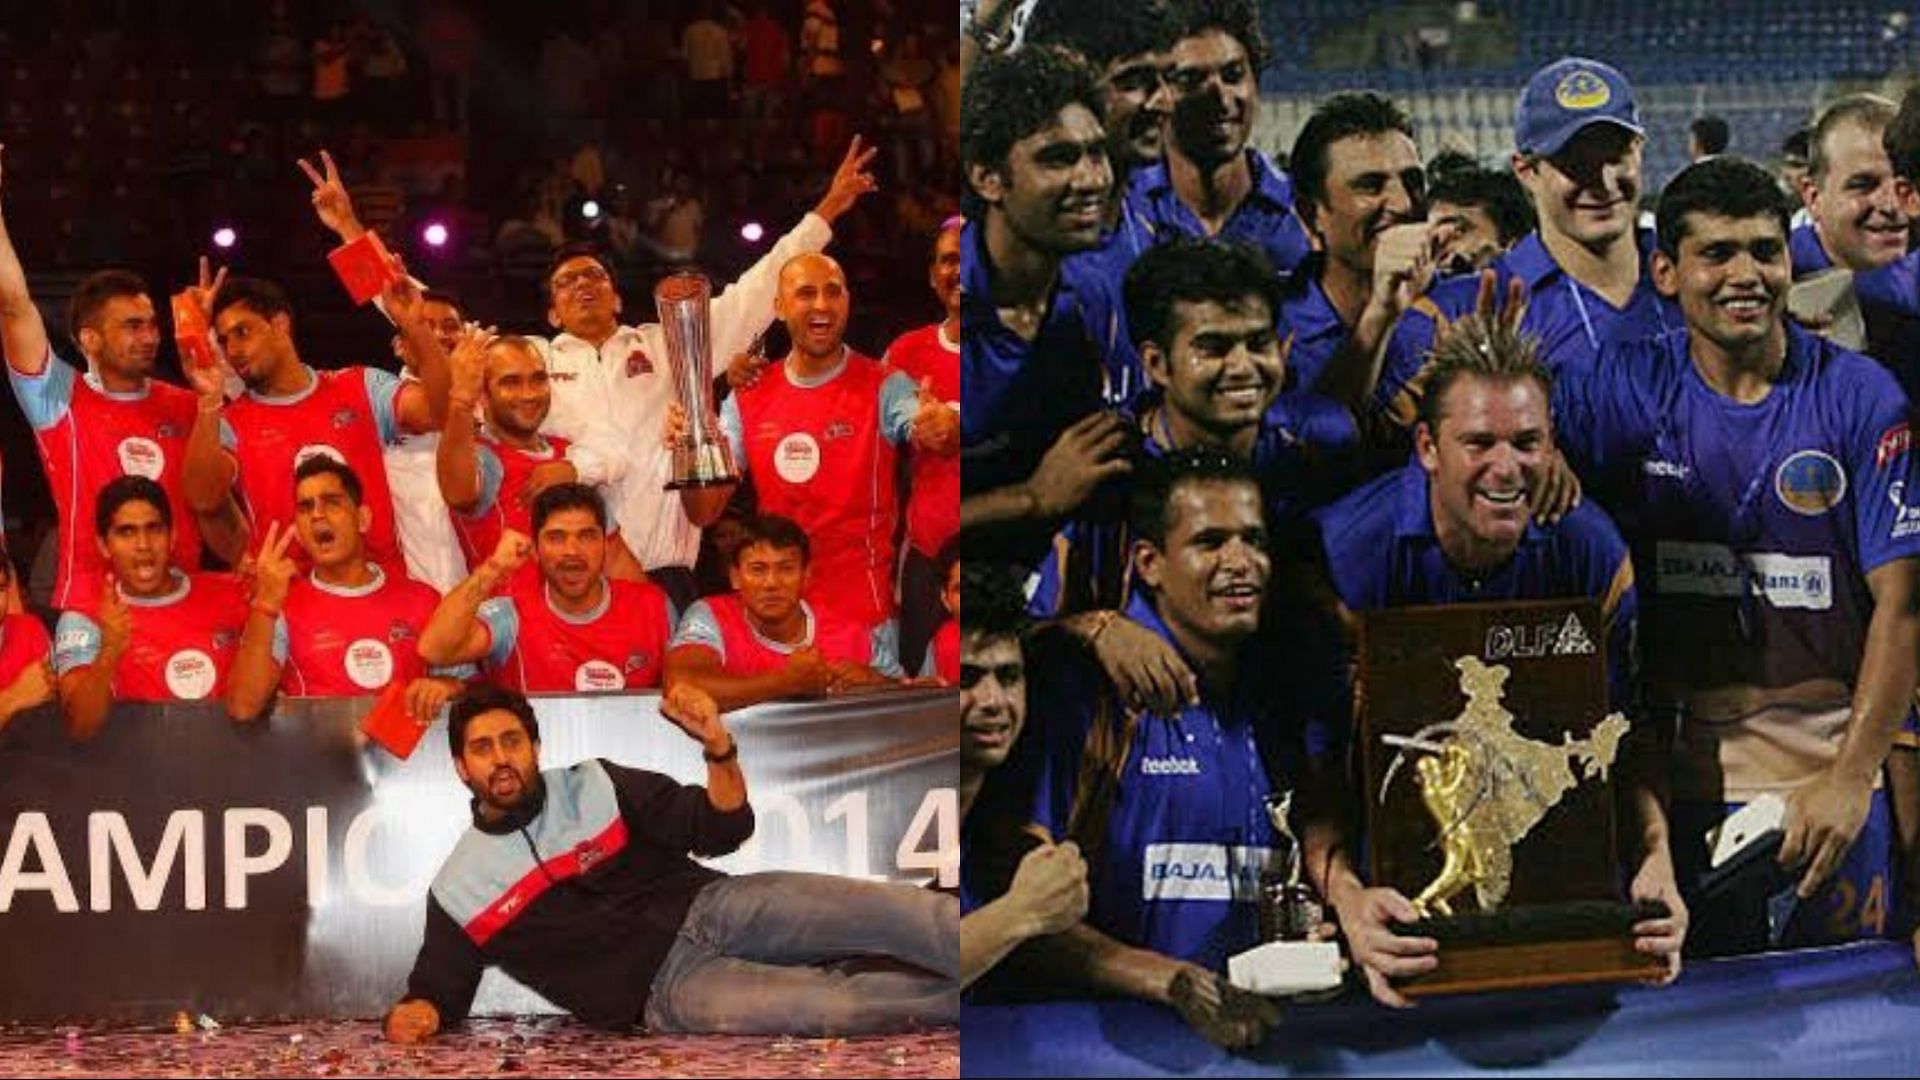 Jaipur Pink Panthers and Rajasthan Royals have quite a few similarities